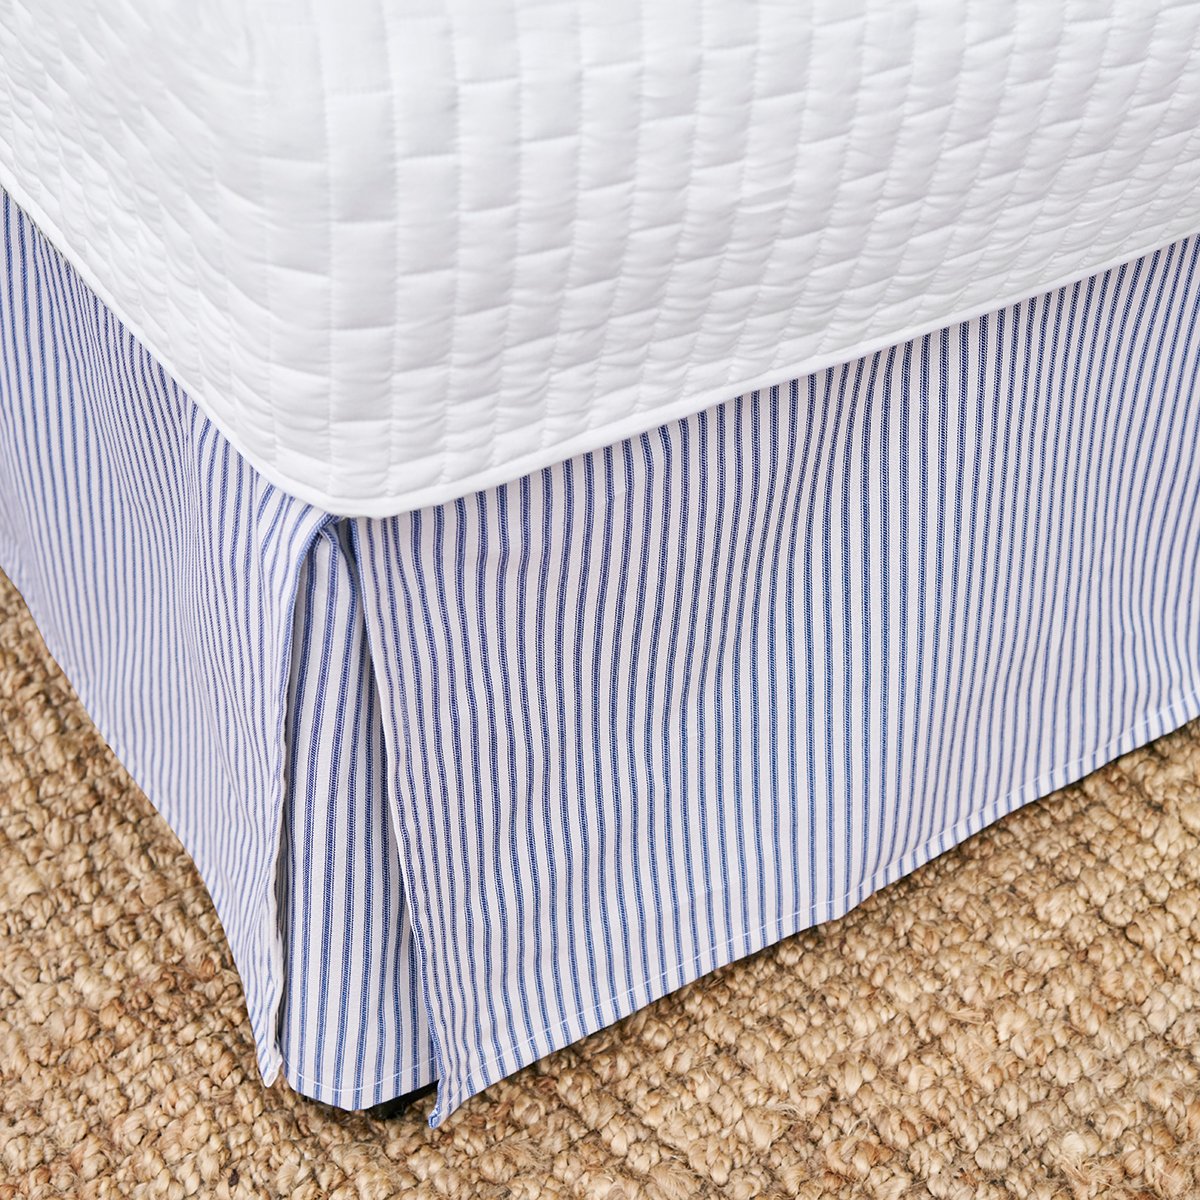 Ticking Stripe Bedskirt | 5 Colors Available | Twin, Full, Queen, King